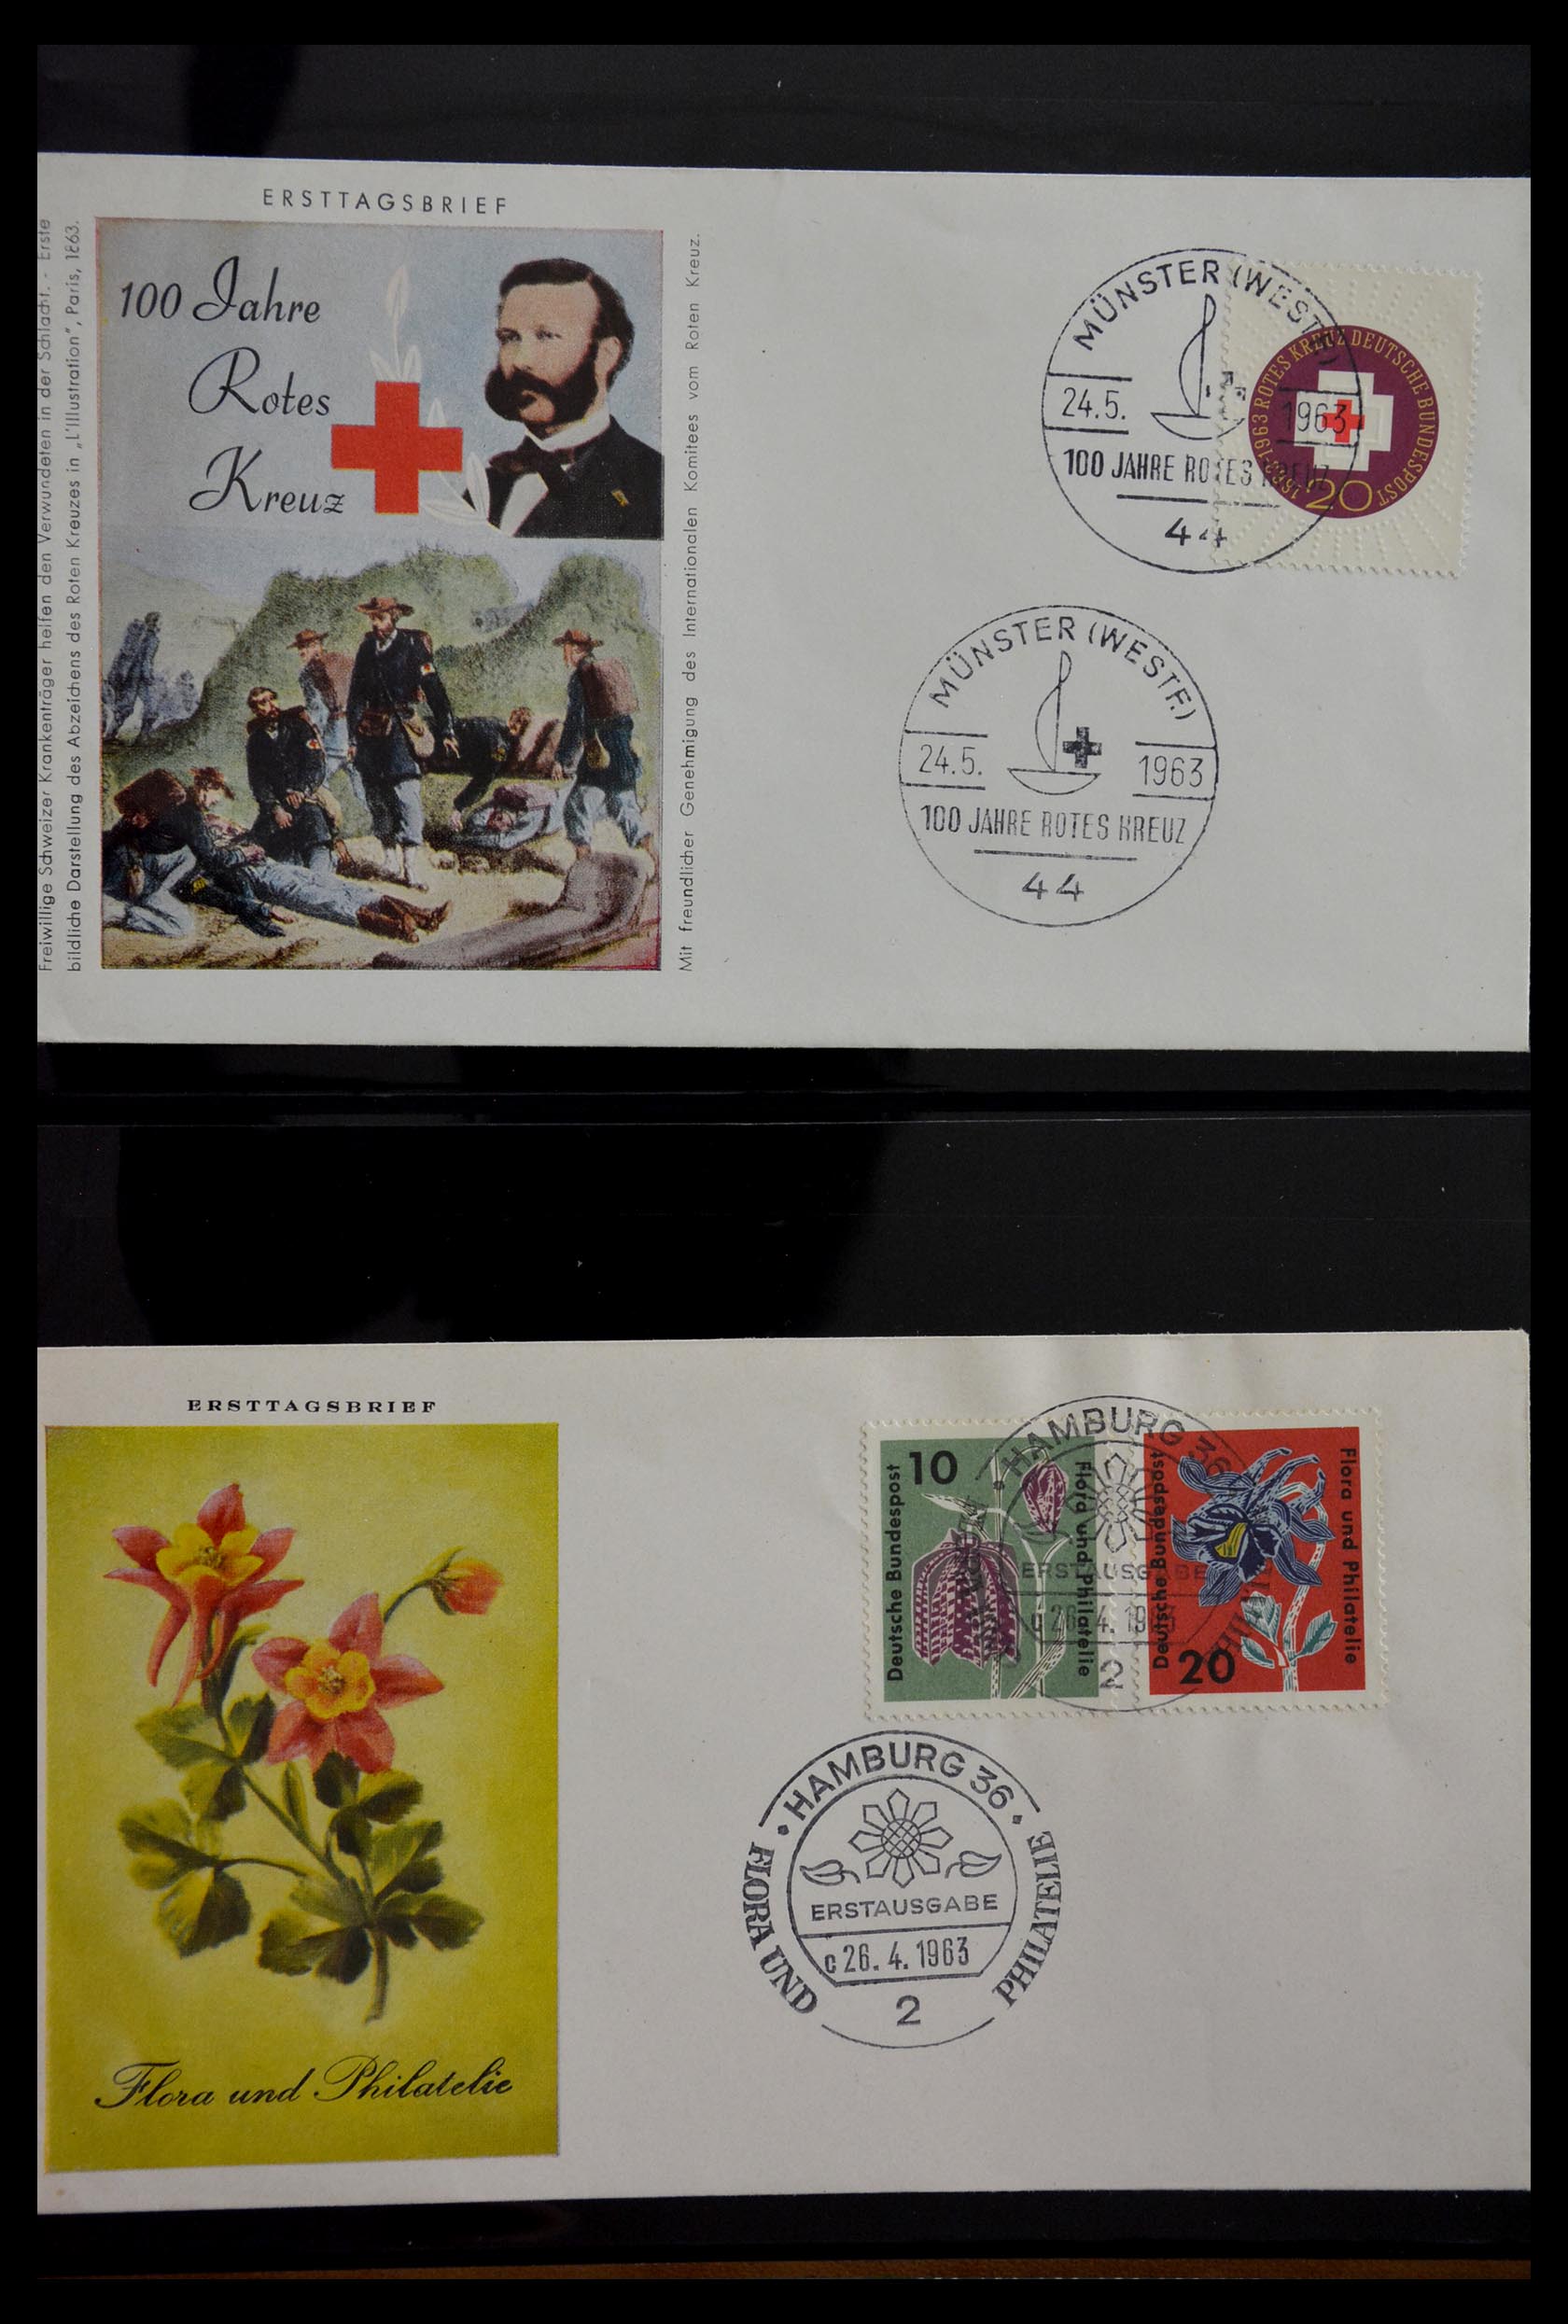 29382 026 - 29382 Germany covers and FDC's 1936-1965.